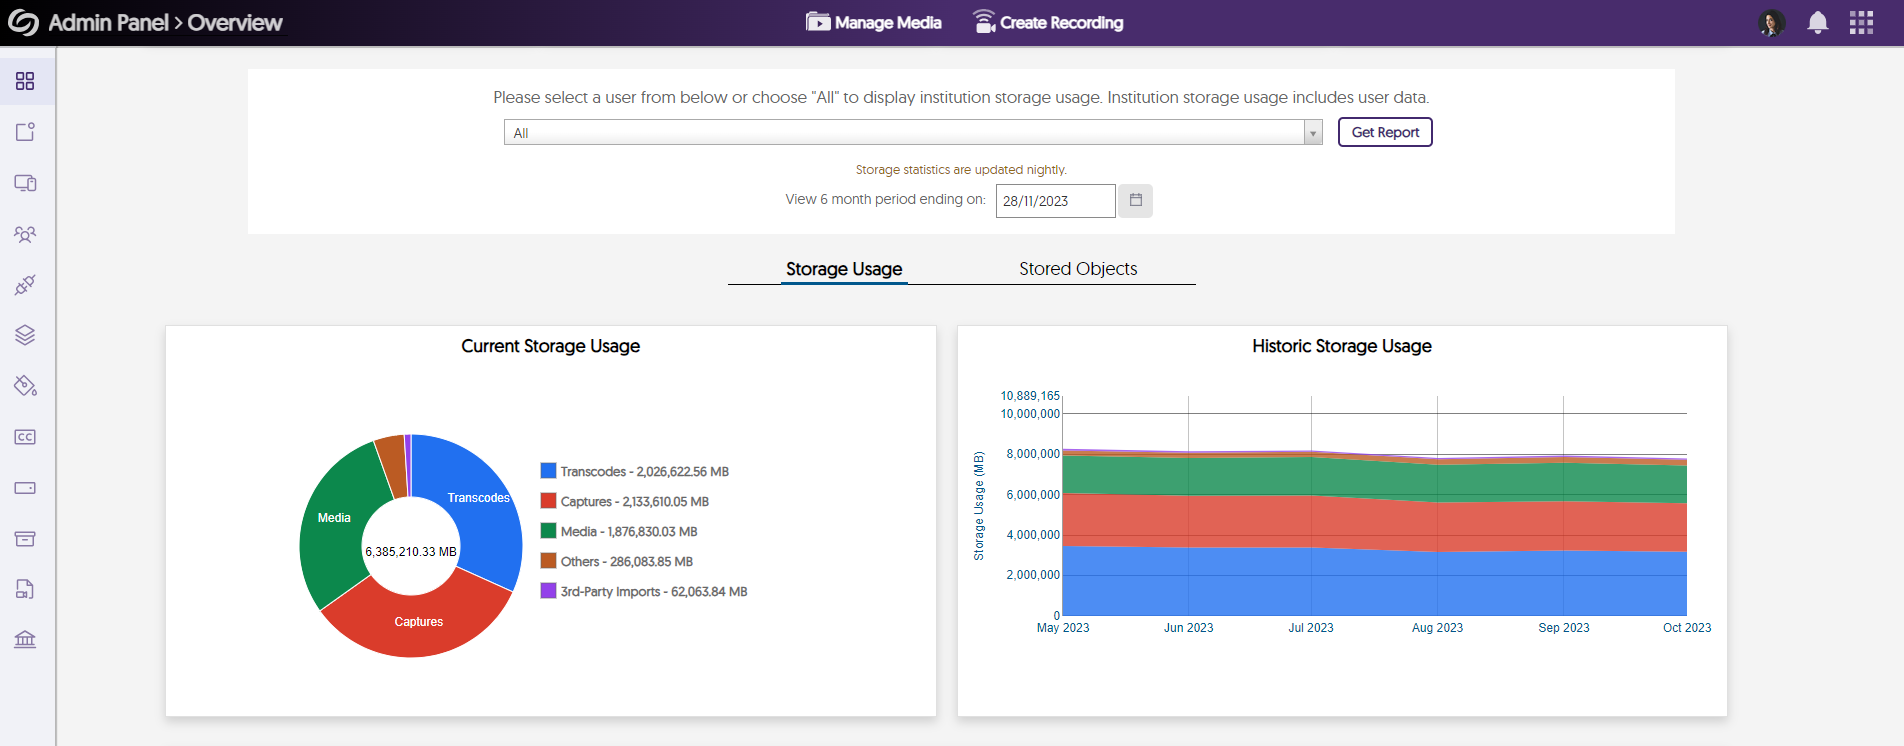 A showcase of the Storage Usage graphs in the Overview page.